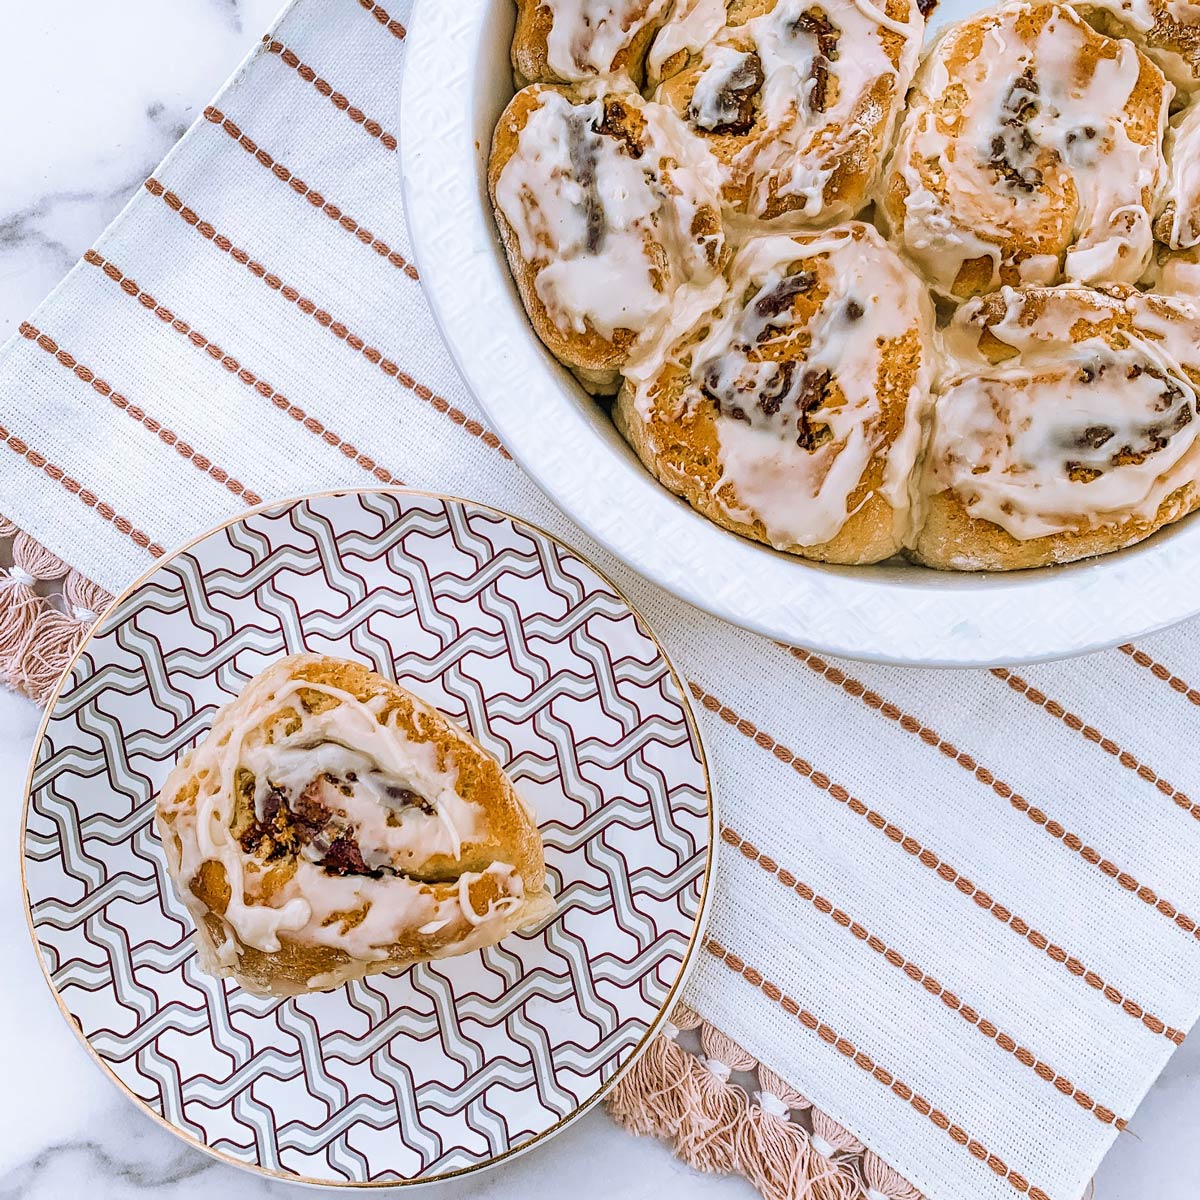 Cacao Almond Rolls